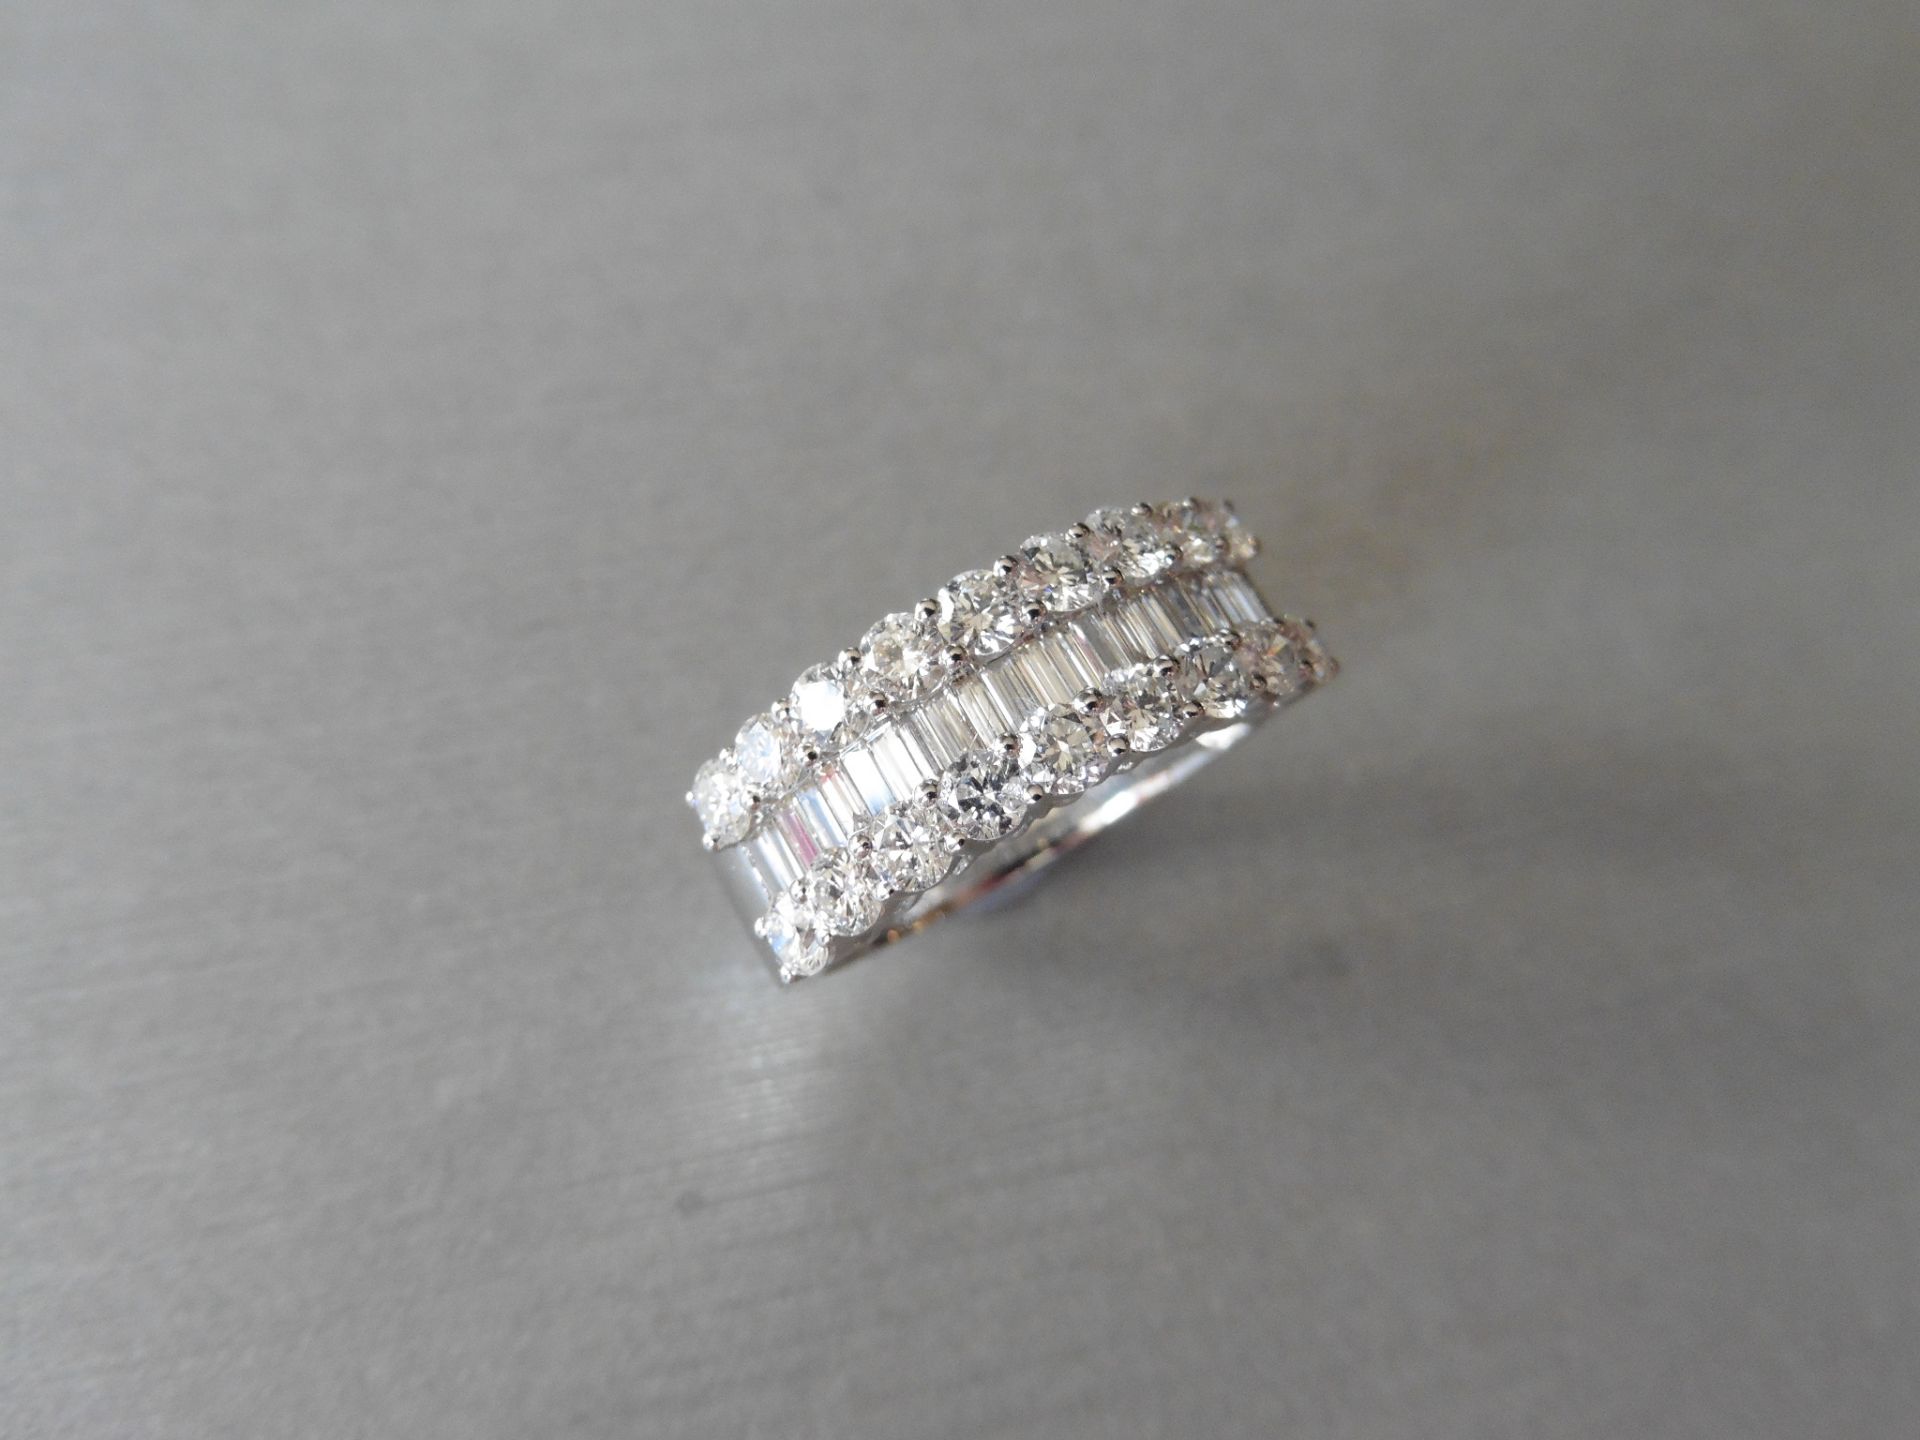 18ct white gold diamond band dress ring. Set with 3 rows of diamonds, 2 rows of brilliant cut